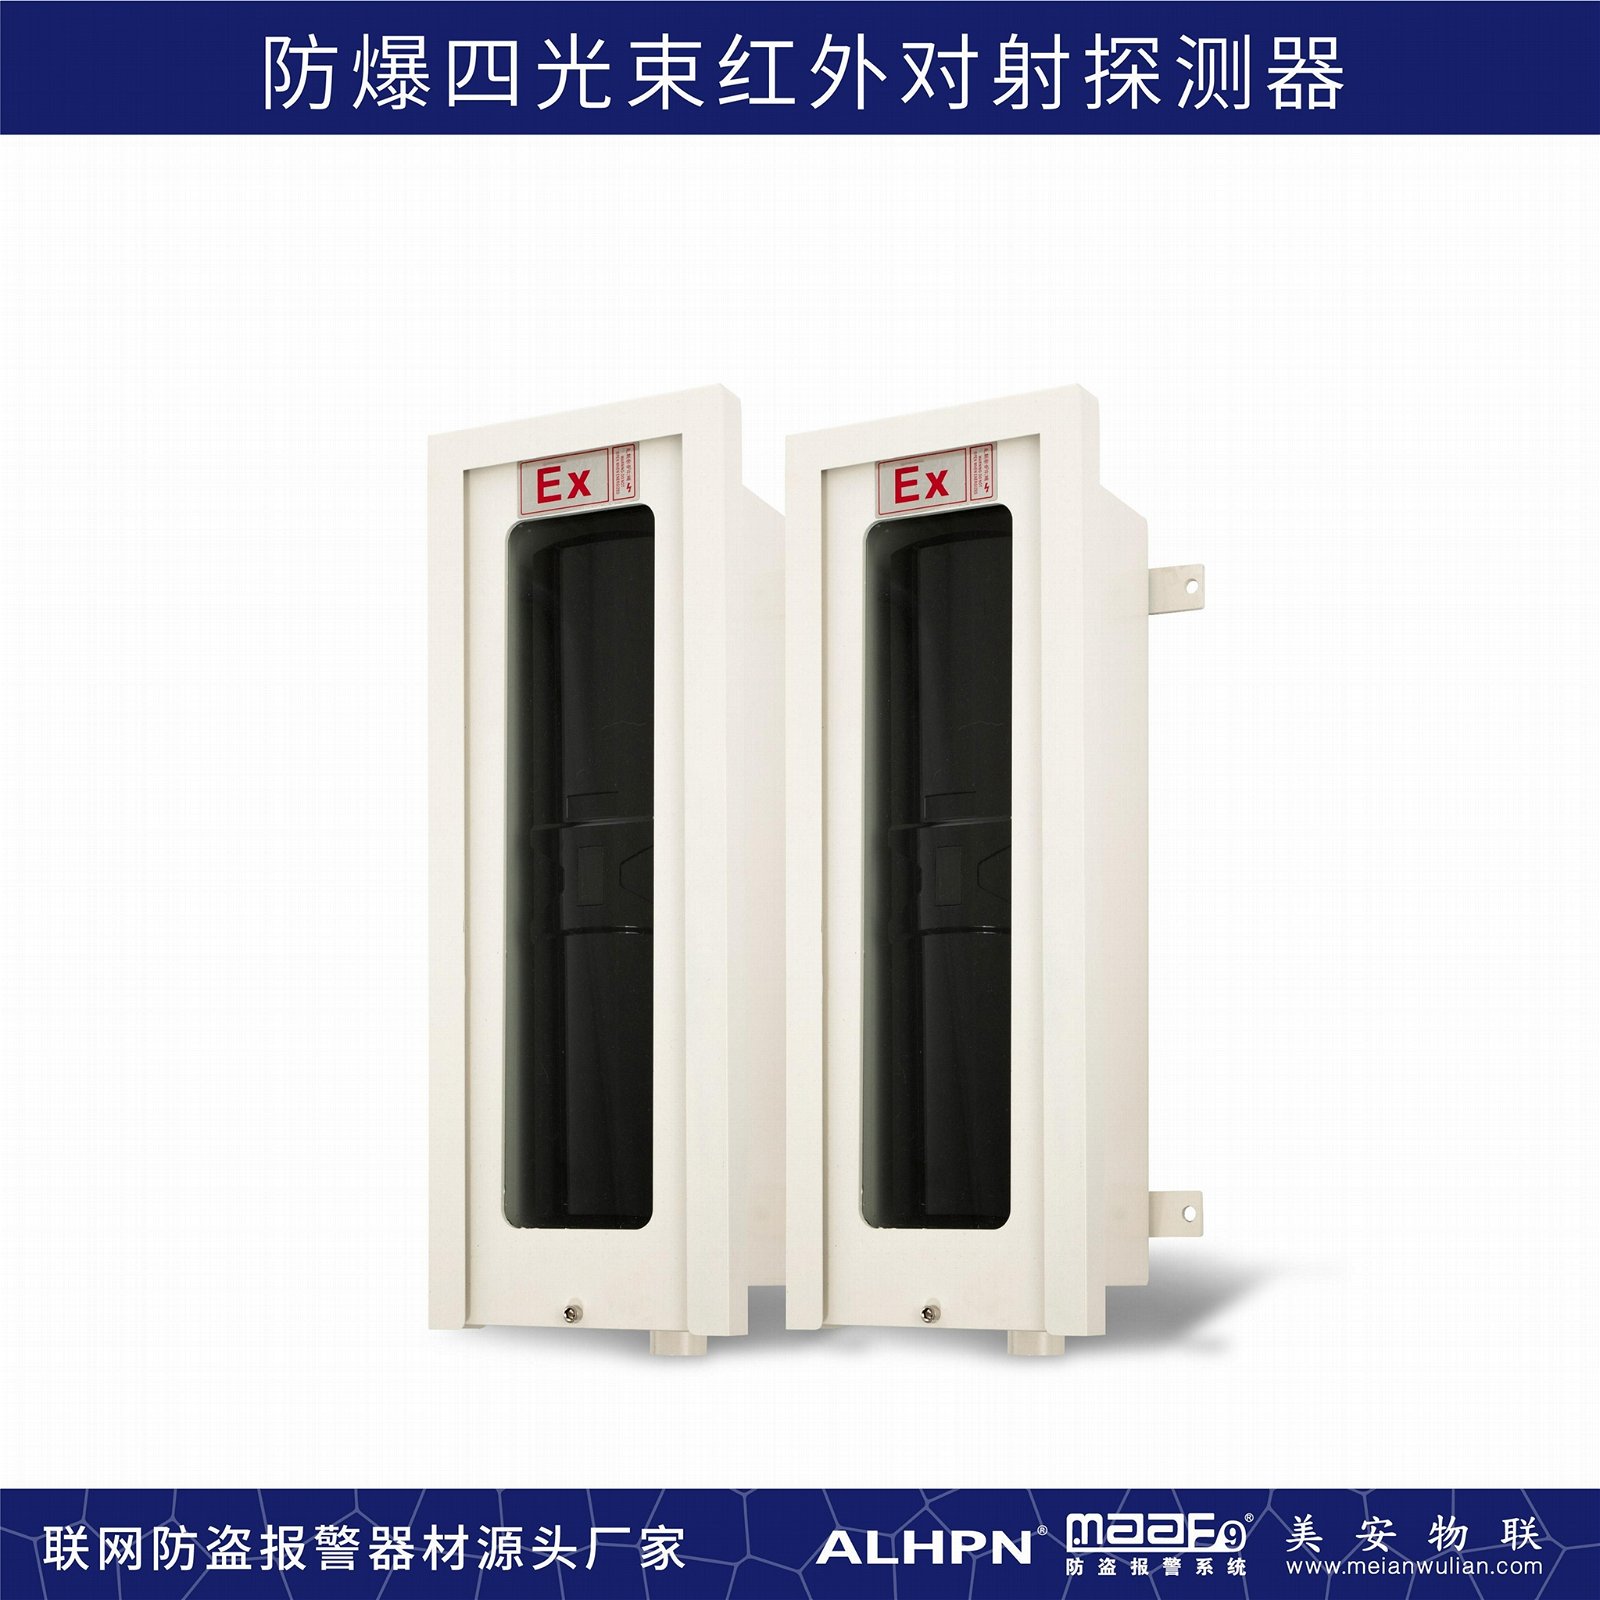 Explosion-proof infrared detector ABH 4 beams